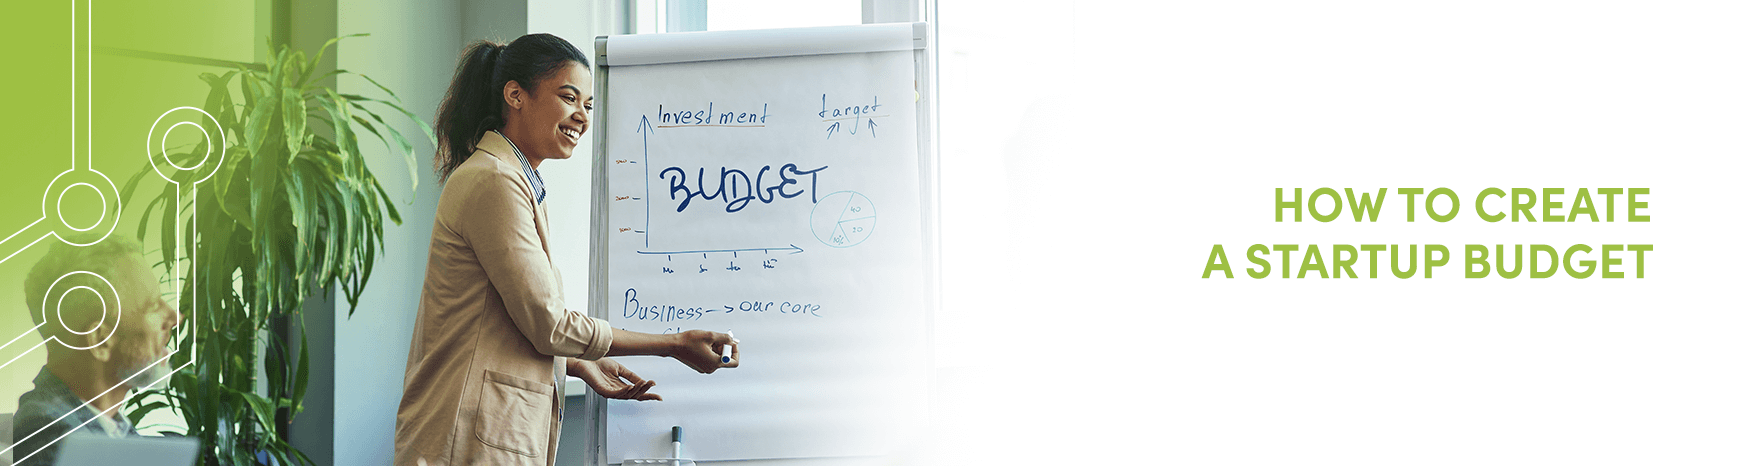 How to Create a Startup Budget